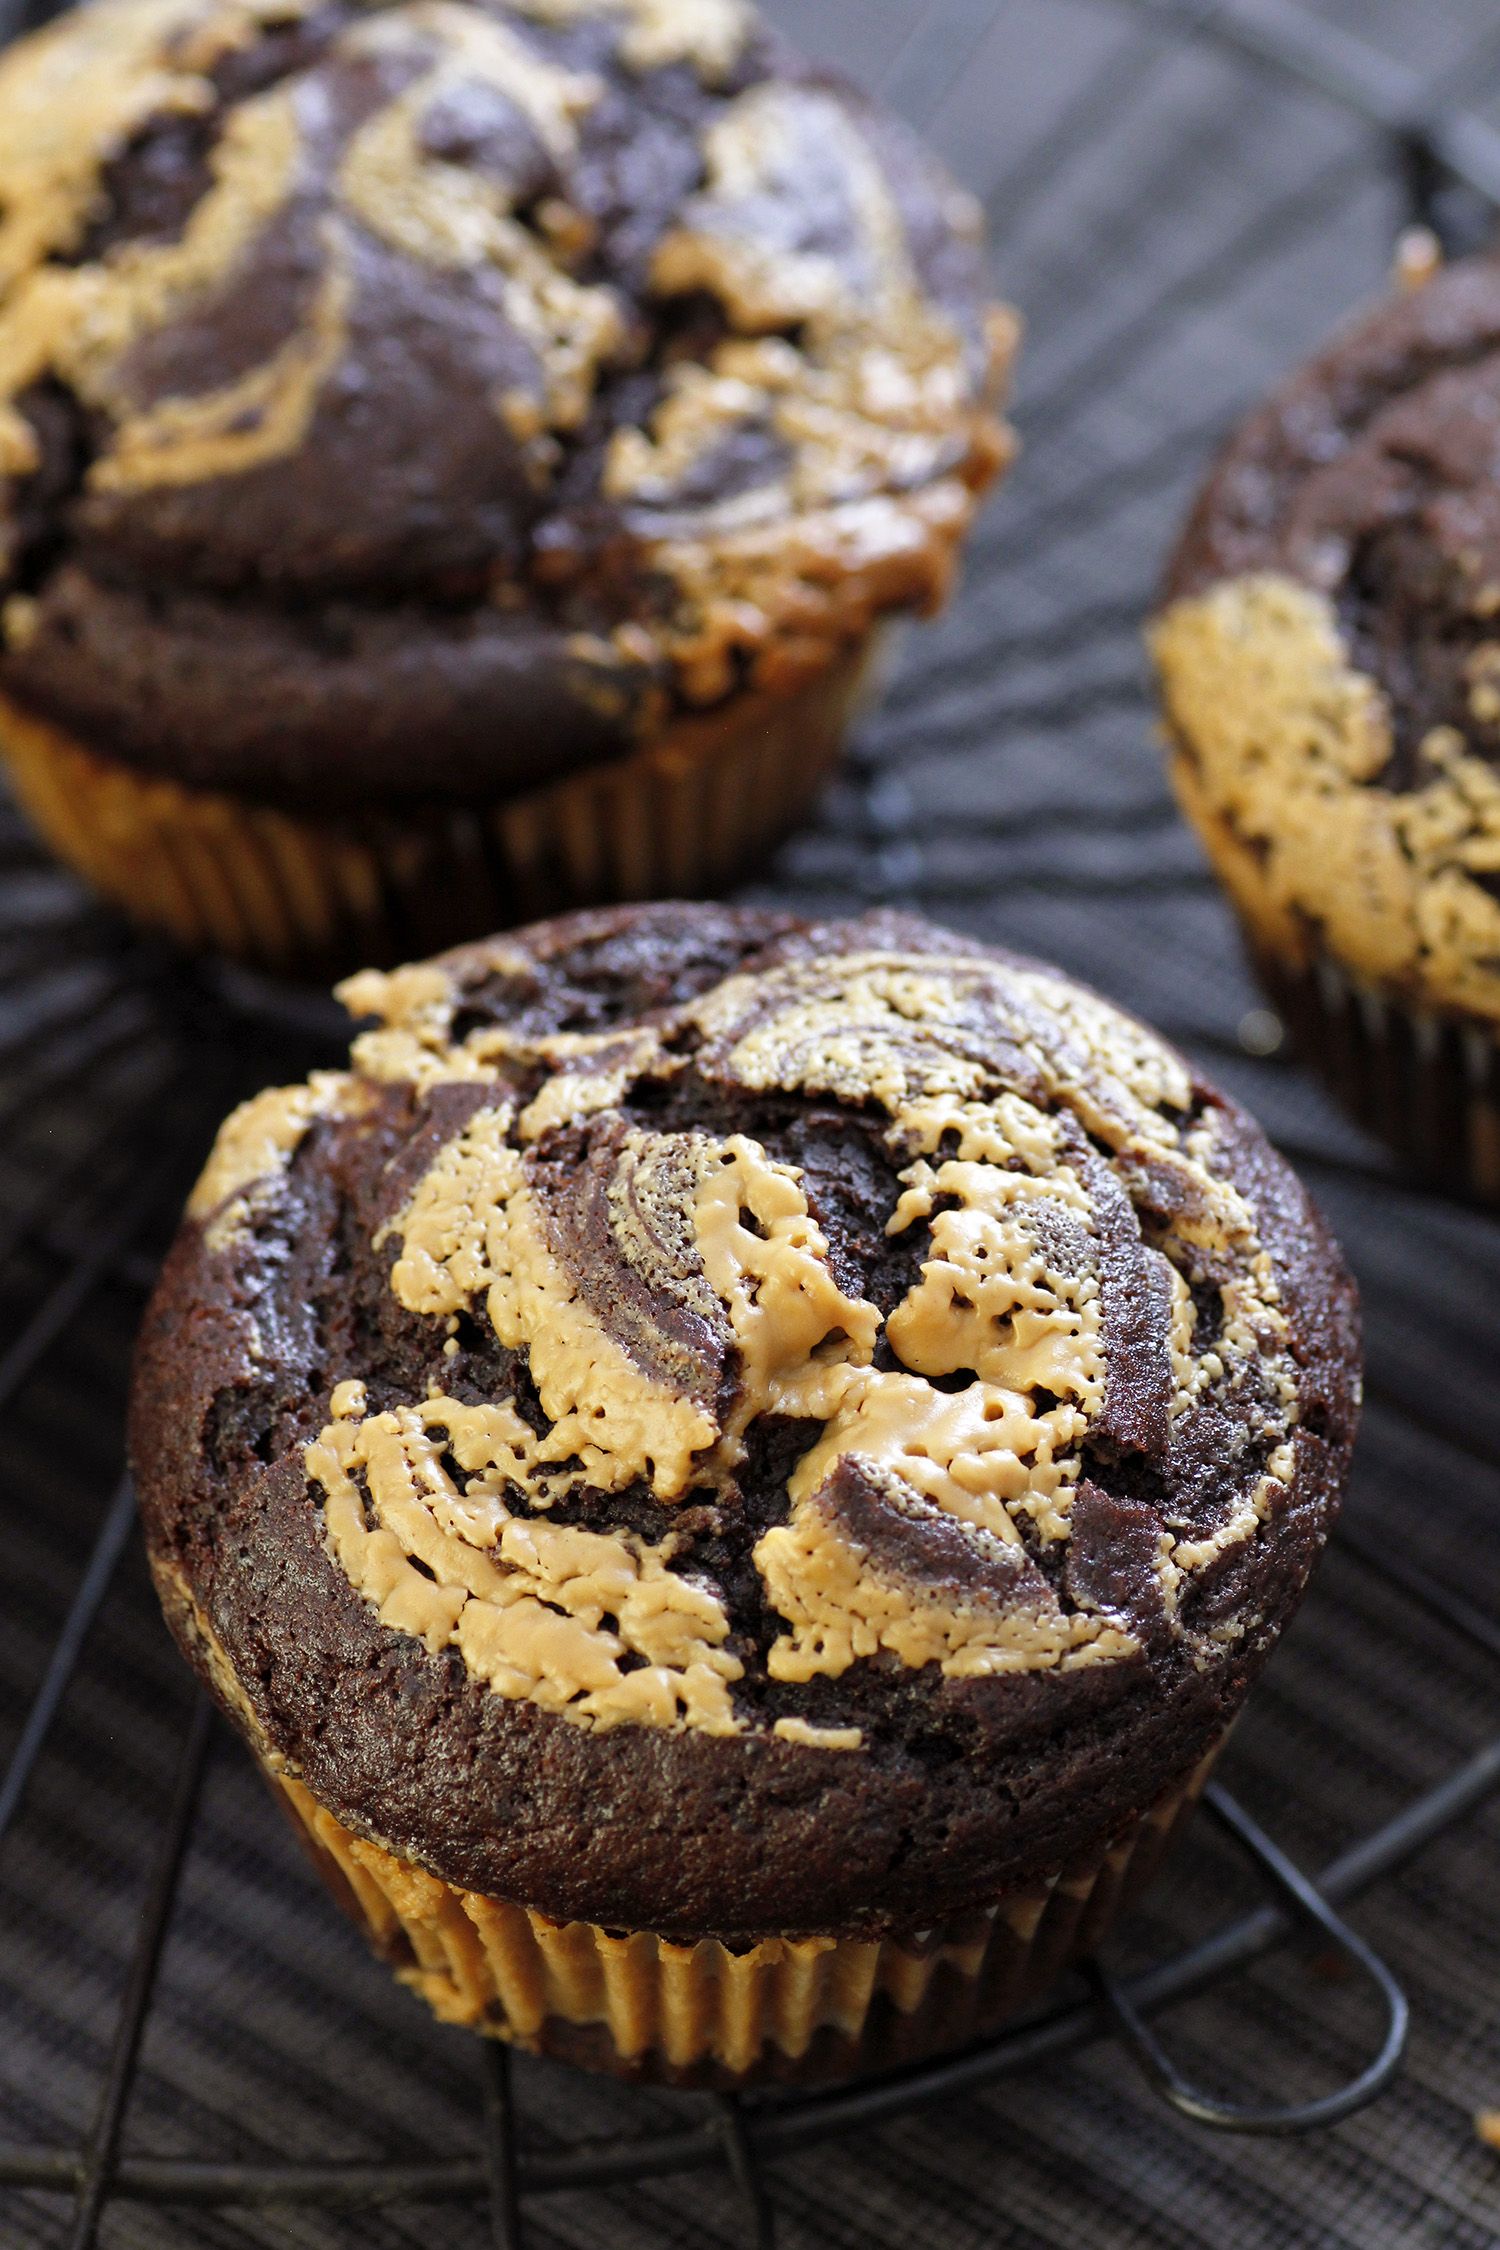 https://www.oogio.net/wp-content/uploads/2018/06/marbles_chocolate_peanut_butter_muffins-s.jpg